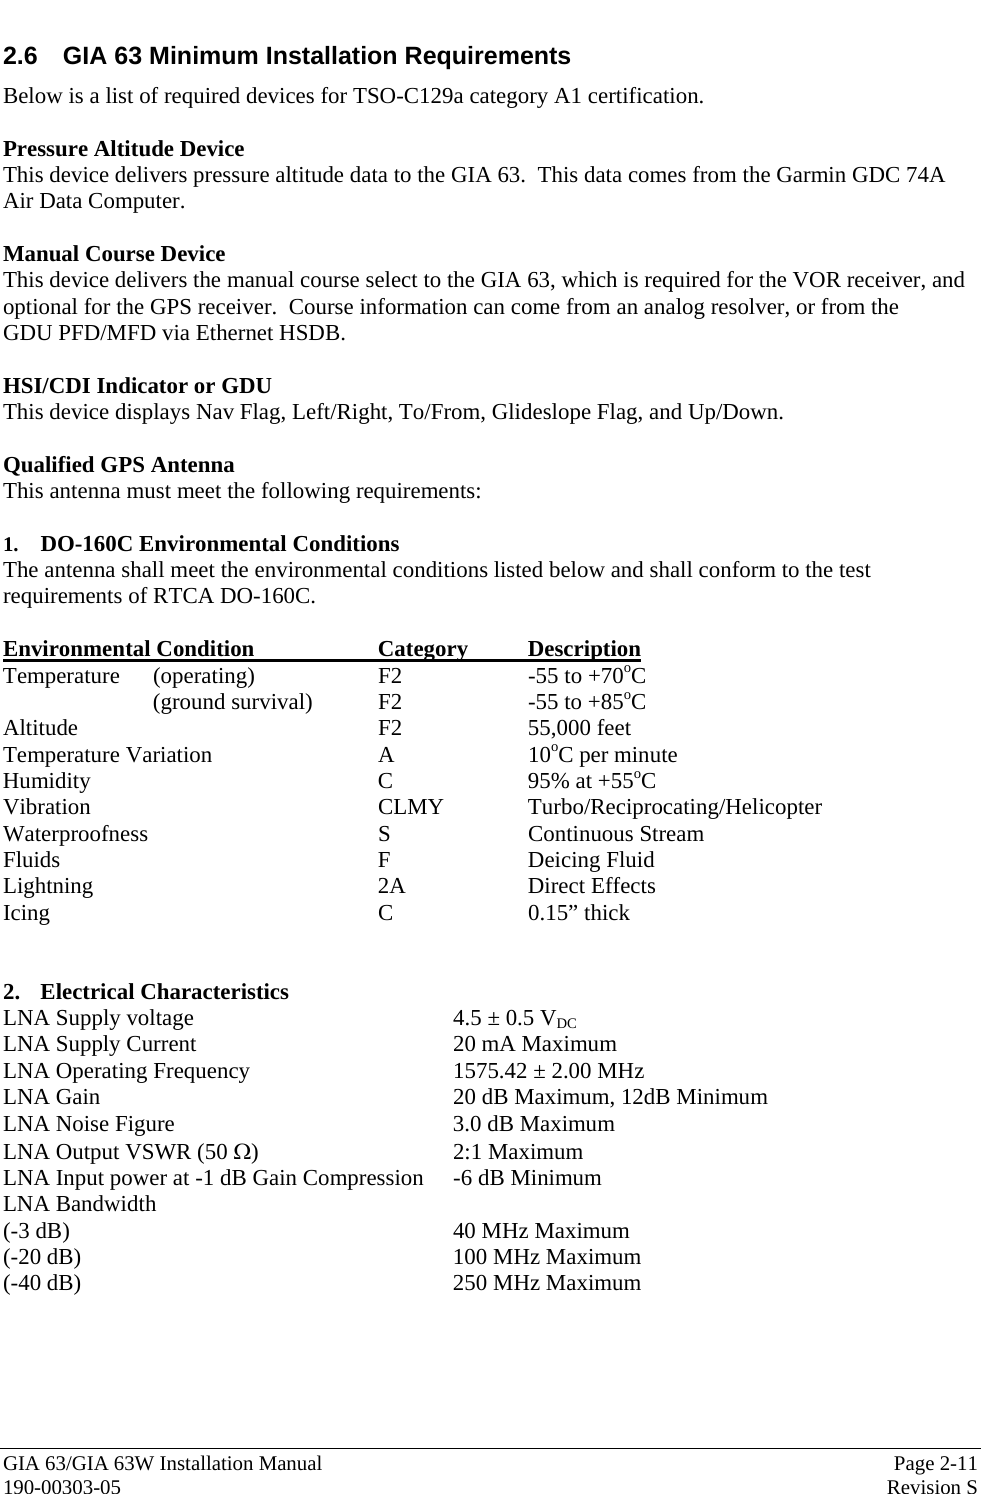  GIA 63/GIA 63W Installation Manual  Page 2-11 190-00303-05  Revision S 2.6  GIA 63 Minimum Installation Requirements Below is a list of required devices for TSO-C129a category A1 certification.   Pressure Altitude Device This device delivers pressure altitude data to the GIA 63.  This data comes from the Garmin GDC 74A Air Data Computer.  Manual Course Device  This device delivers the manual course select to the GIA 63, which is required for the VOR receiver, and optional for the GPS receiver.  Course information can come from an analog resolver, or from the      GDU PFD/MFD via Ethernet HSDB.  HSI/CDI Indicator or GDU This device displays Nav Flag, Left/Right, To/From, Glideslope Flag, and Up/Down.   Qualified GPS Antenna This antenna must meet the following requirements:  1.  DO-160C Environmental Conditions The antenna shall meet the environmental conditions listed below and shall conform to the test requirements of RTCA DO-160C.  Environmental Condition    Category  Description Temperature (operating)  F2  -55 to +70oC (ground survival)  F2    -55 to +85oC Altitude    F2  55,000 feet Temperature Variation   A  10oC per minute Humidity    C  95% at +55oC Vibration    CLMY  Turbo/Reciprocating/Helicopter Waterproofness    S  Continuous Stream Fluids     F  Deicing Fluid Lightning    2A  Direct Effects Icing     C  0.15” thick   2. Electrical Characteristics LNA Supply voltage        4.5 ± 0.5 VDC LNA Supply Current    20 mA Maximum LNA Operating Frequency      1575.42 ± 2.00 MHz LNA Gain          20 dB Maximum, 12dB Minimum LNA Noise Figure        3.0 dB Maximum LNA Output VSWR (50 Ω)   2:1 Maximum LNA Input power at -1 dB Gain Compression  -6 dB Minimum LNA Bandwidth (-3 dB)      40 MHz Maximum (-20 dB)     100 MHz Maximum (-40 dB)     250 MHz Maximum  